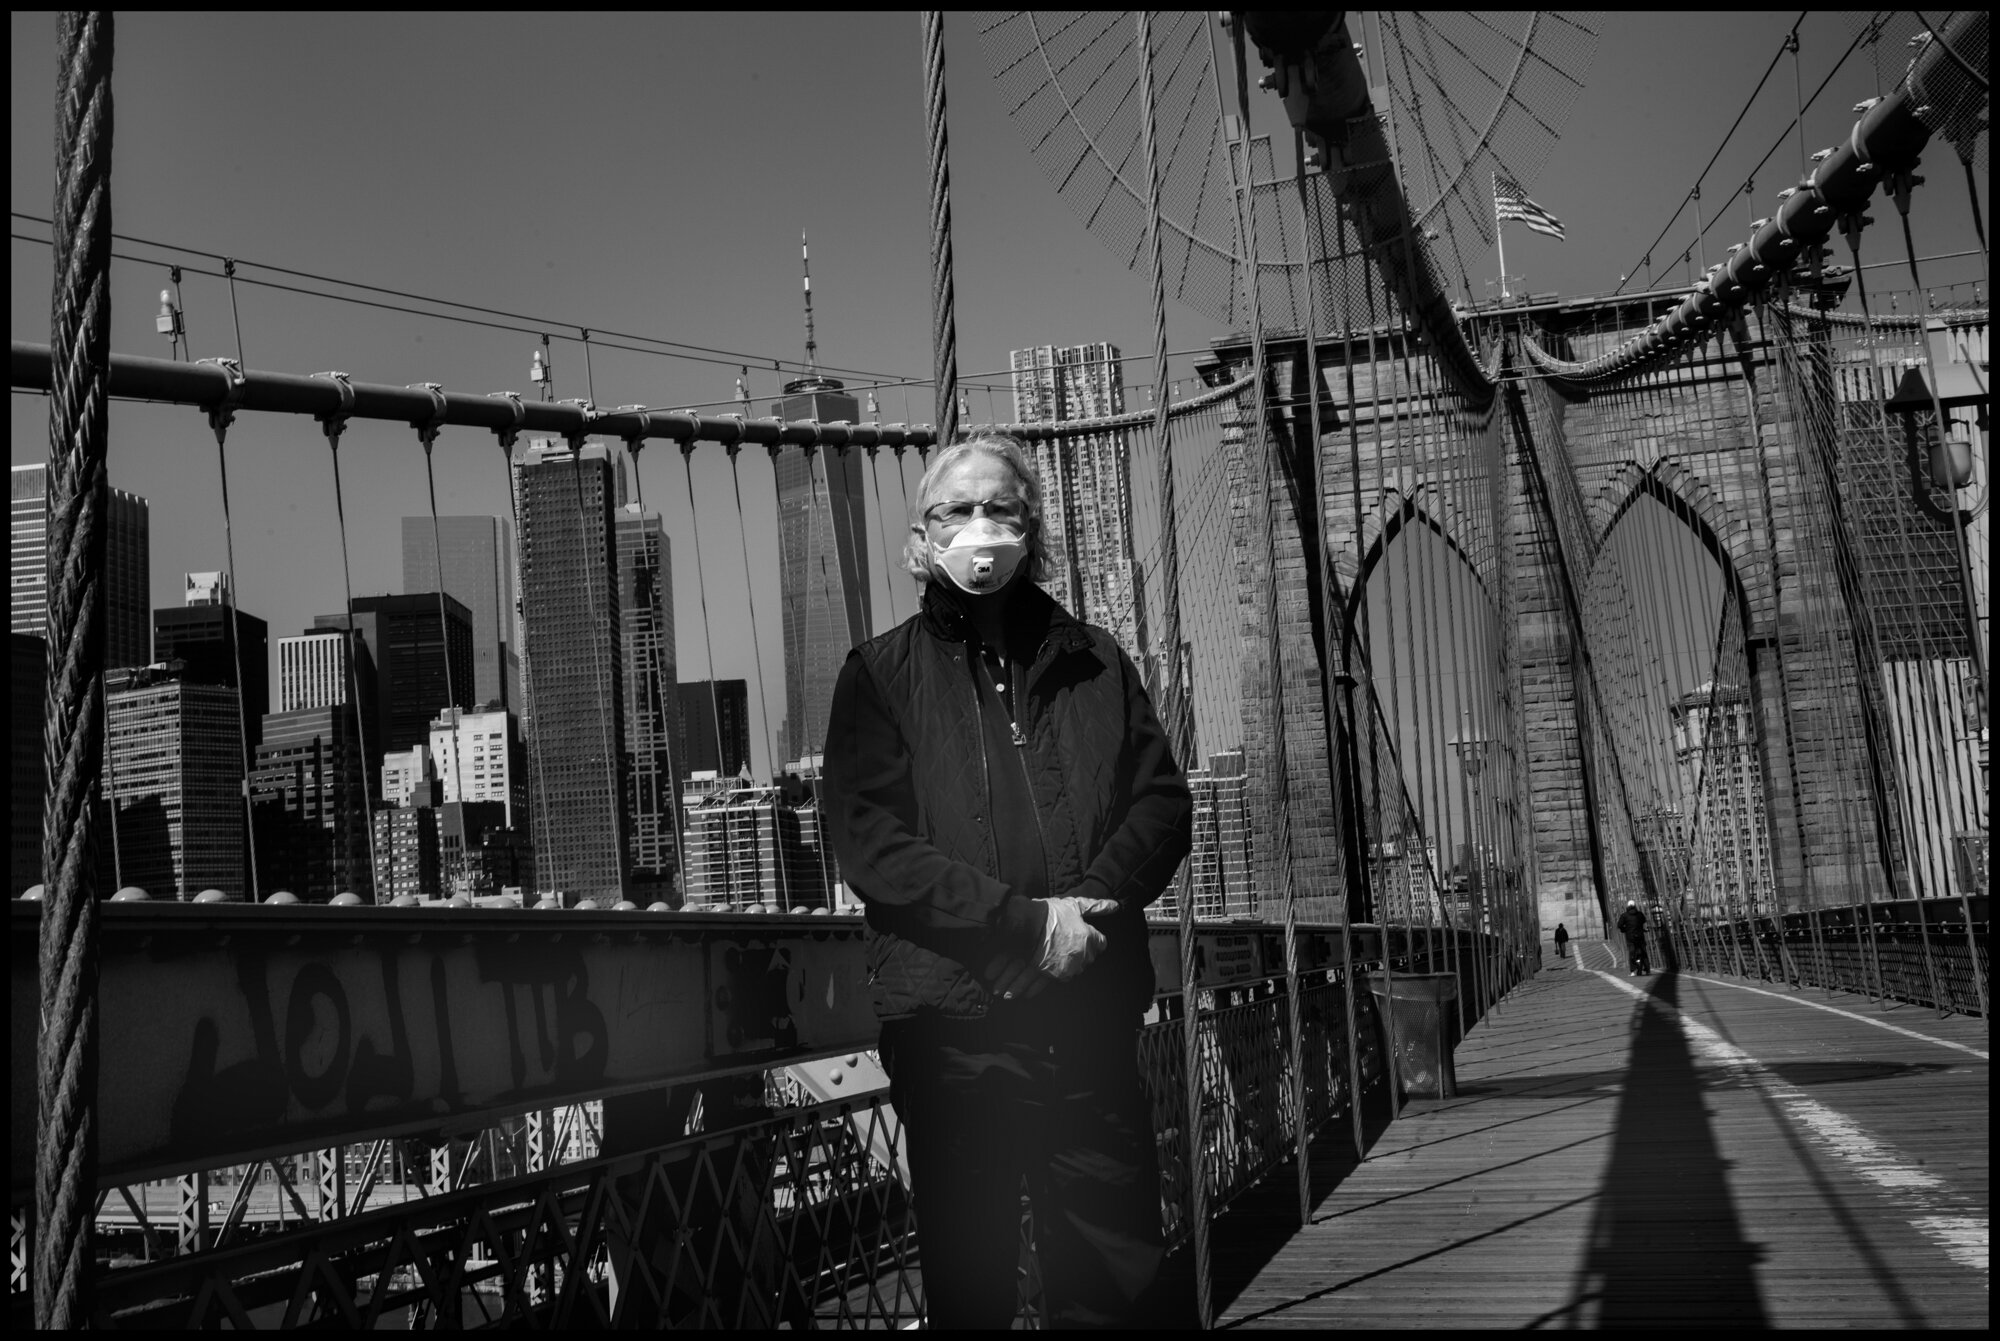  I met a very friendly fashion stylist named MJ on the Brooklyn Bridge. He is originally from Lyon. He works free lance and when we spoke about the current economic package being passed by Congress, he said to me, “what is $1,200 going to do for a fr